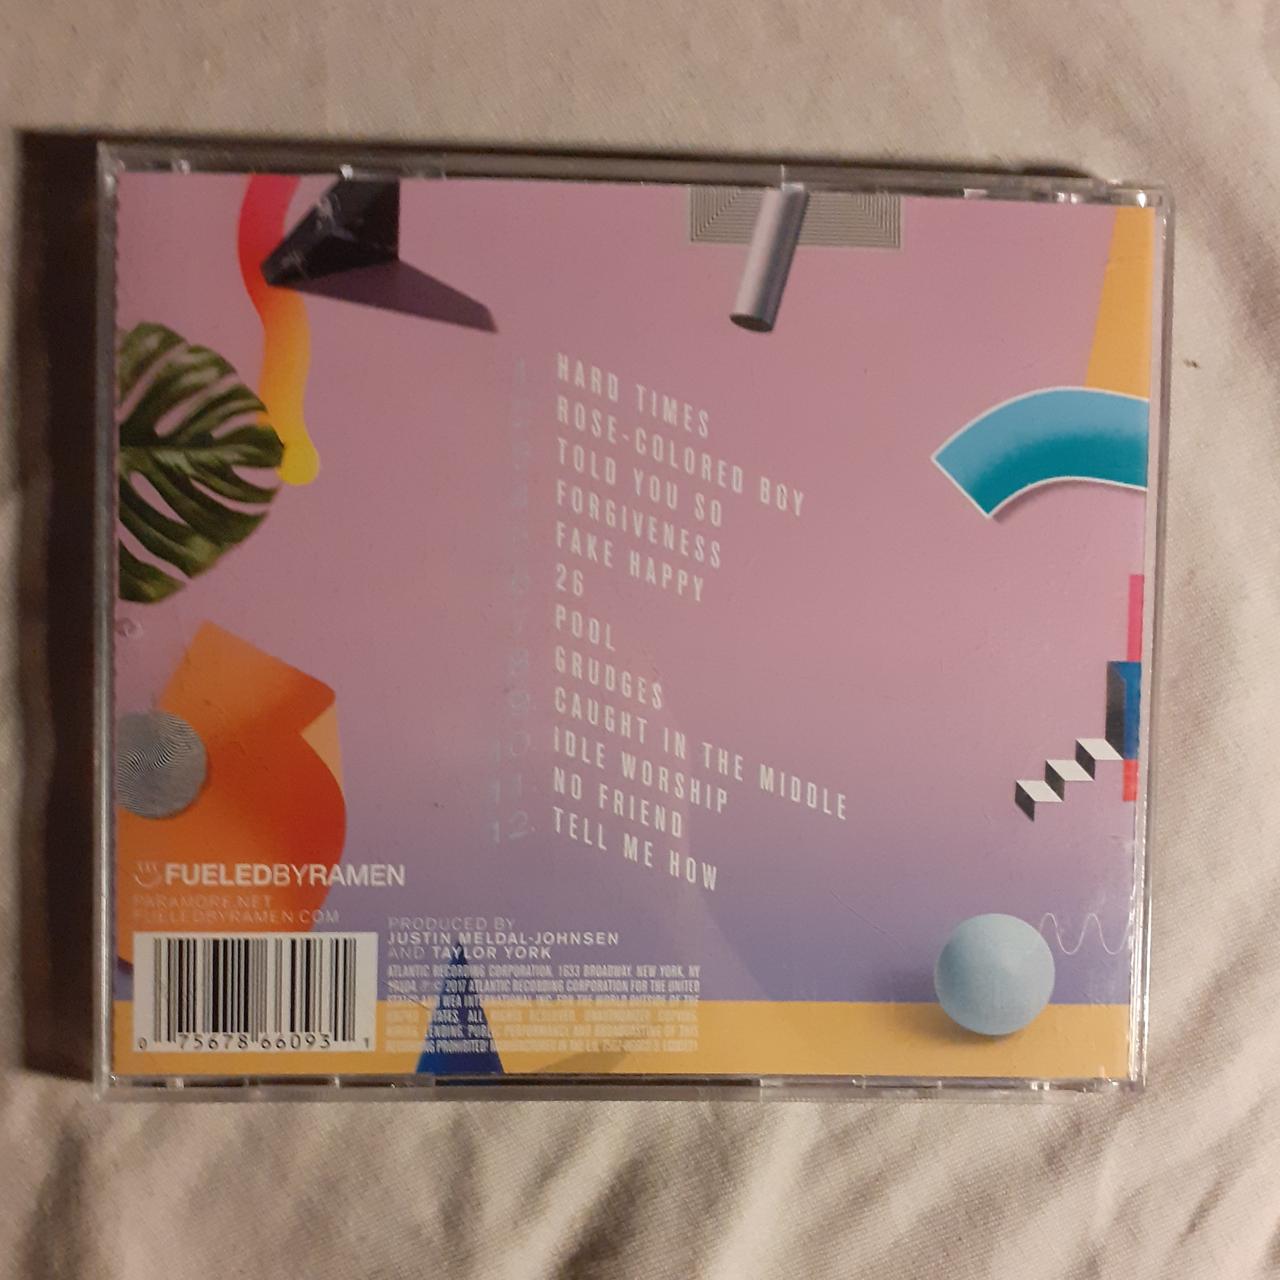 Paramore AFTER LAUGHTER CD